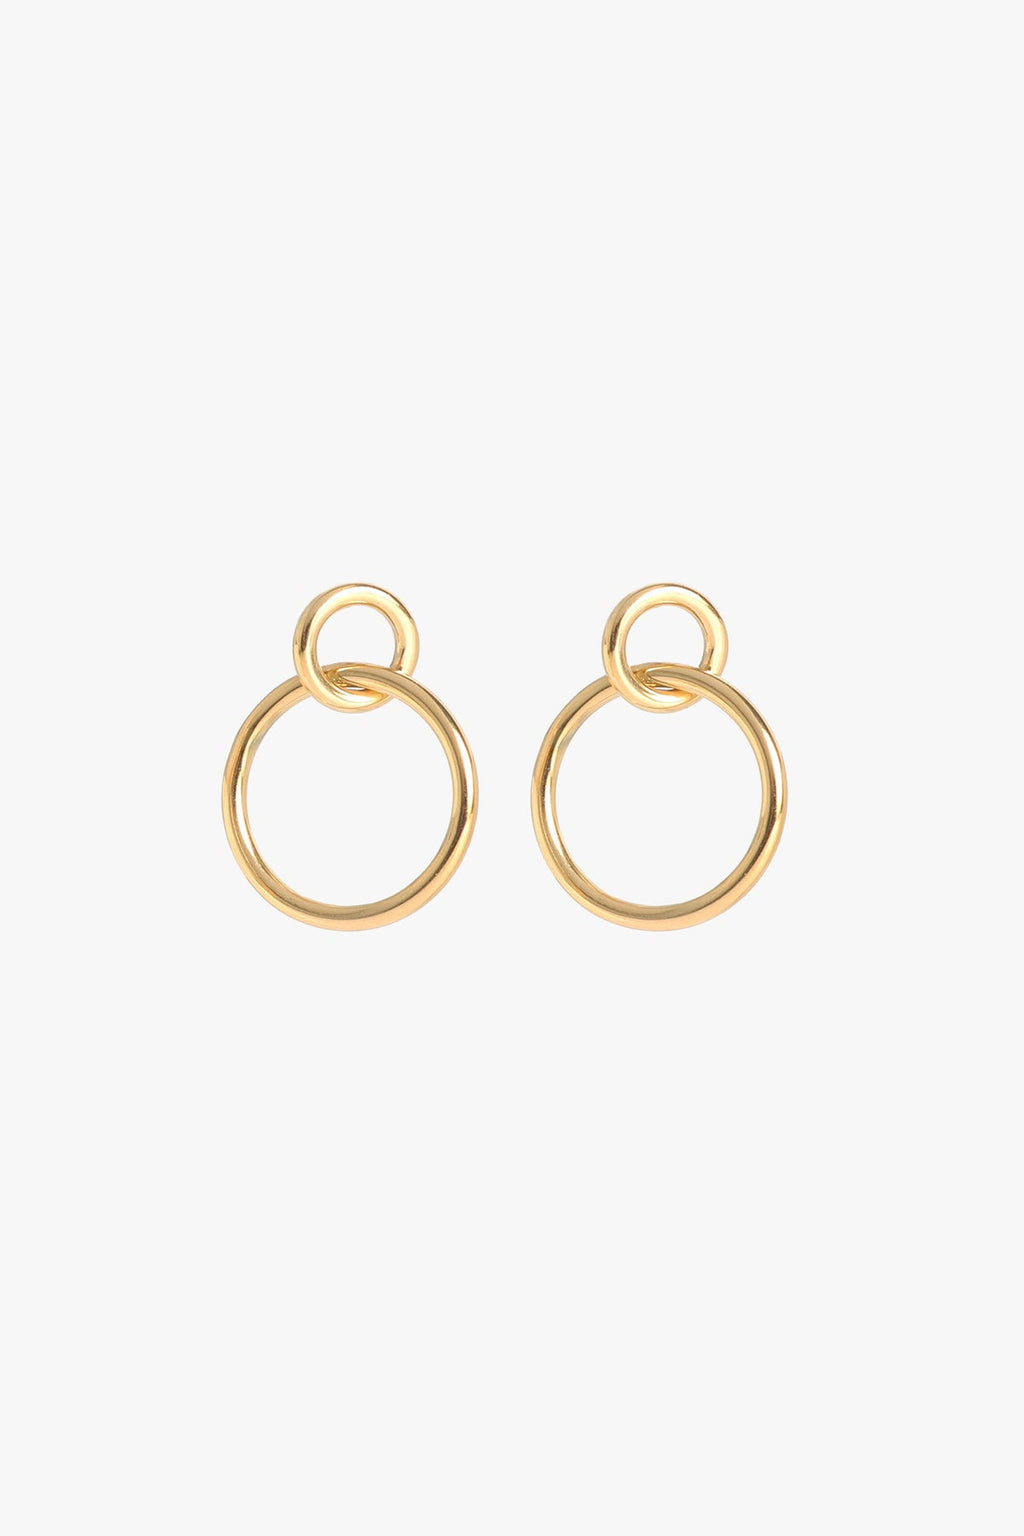 Marrin Costello Jewelry - Ven 1" Hoops - Gold